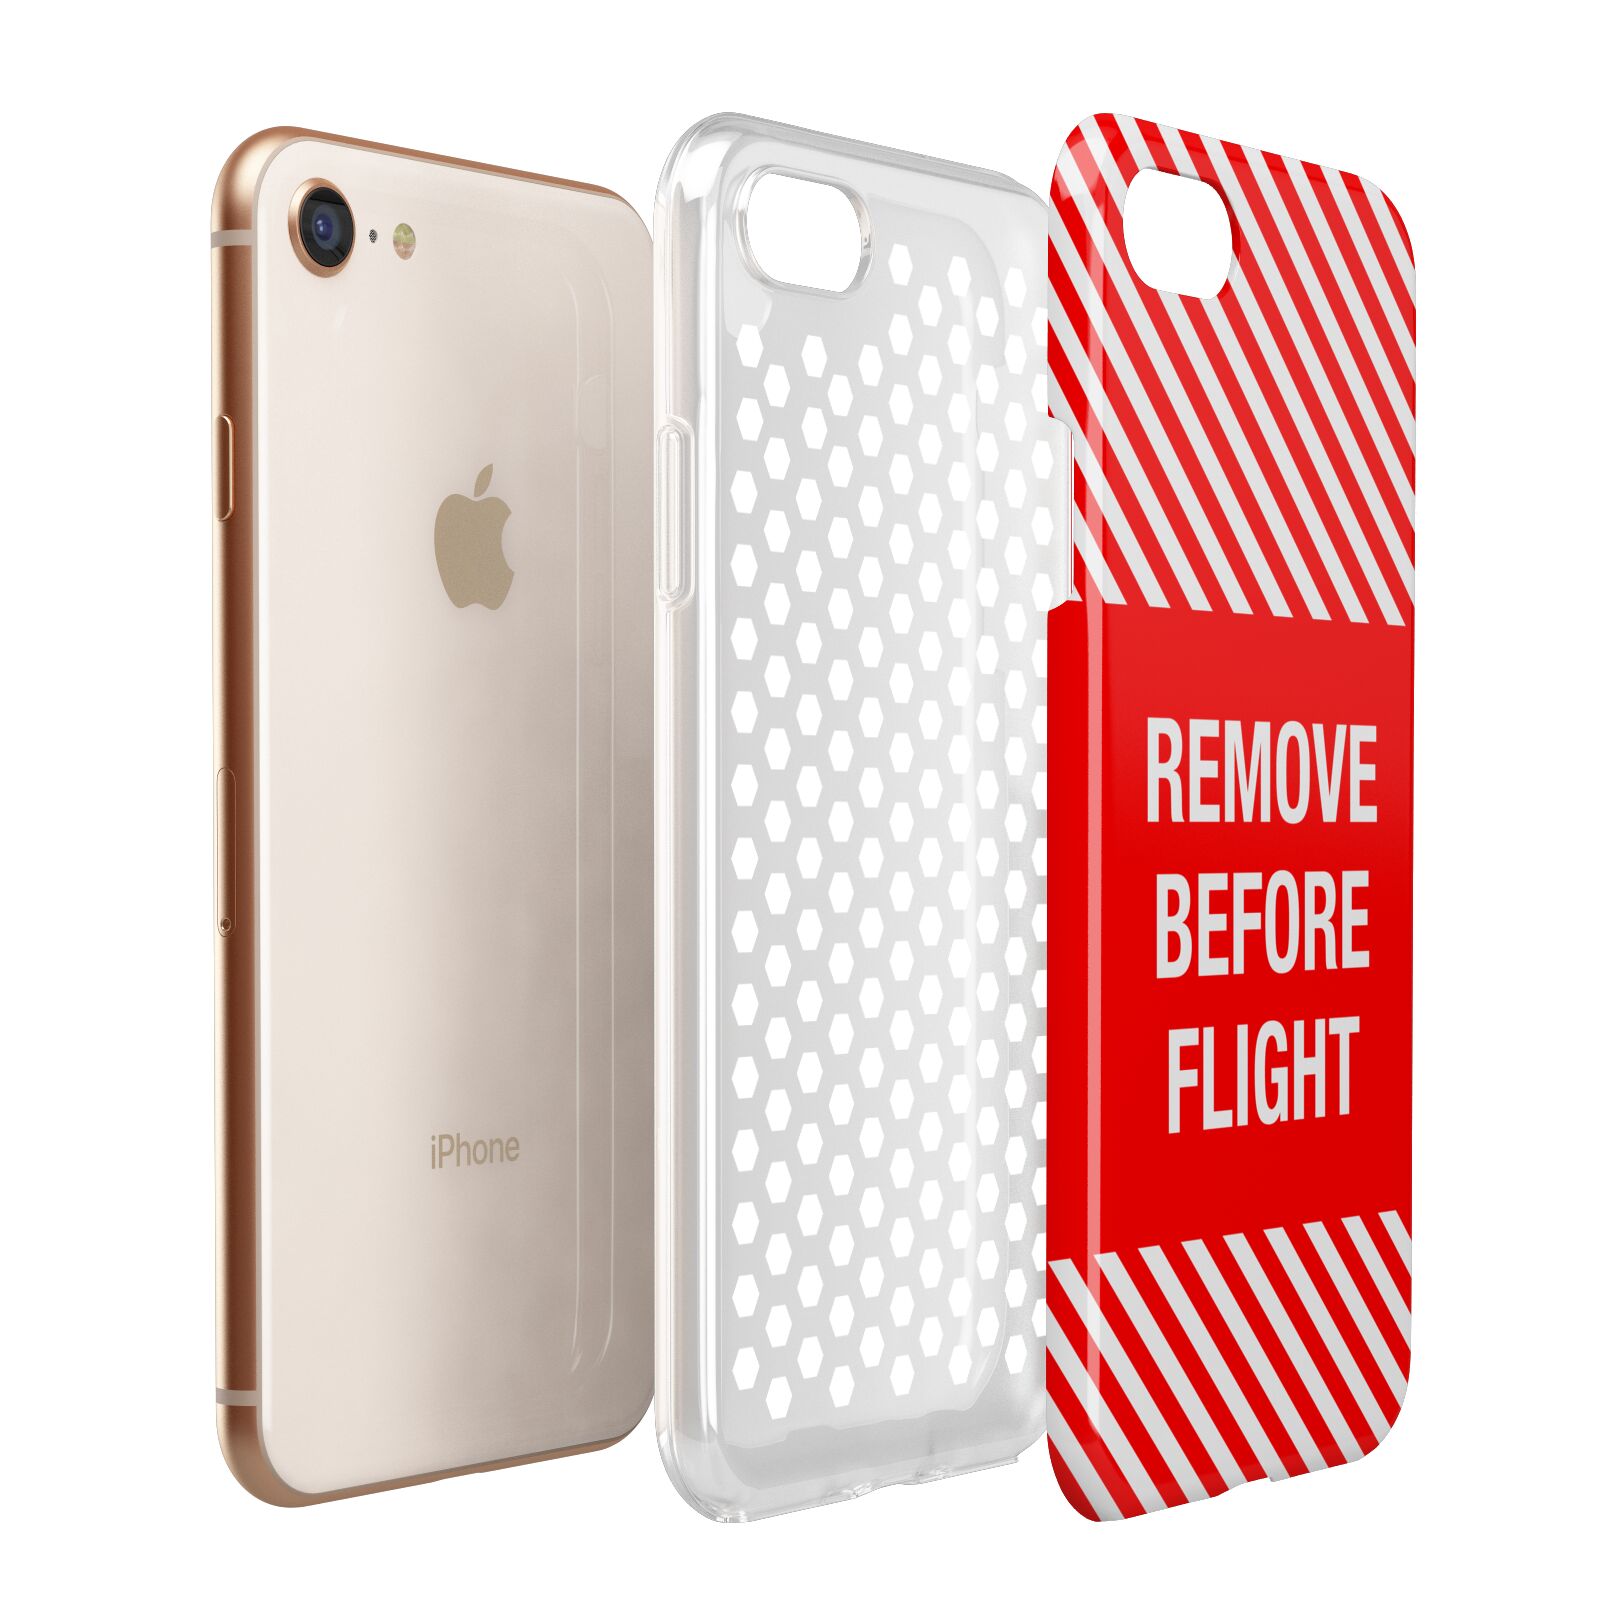 Remove Before Flight Apple iPhone 7 8 3D Tough Case Expanded View